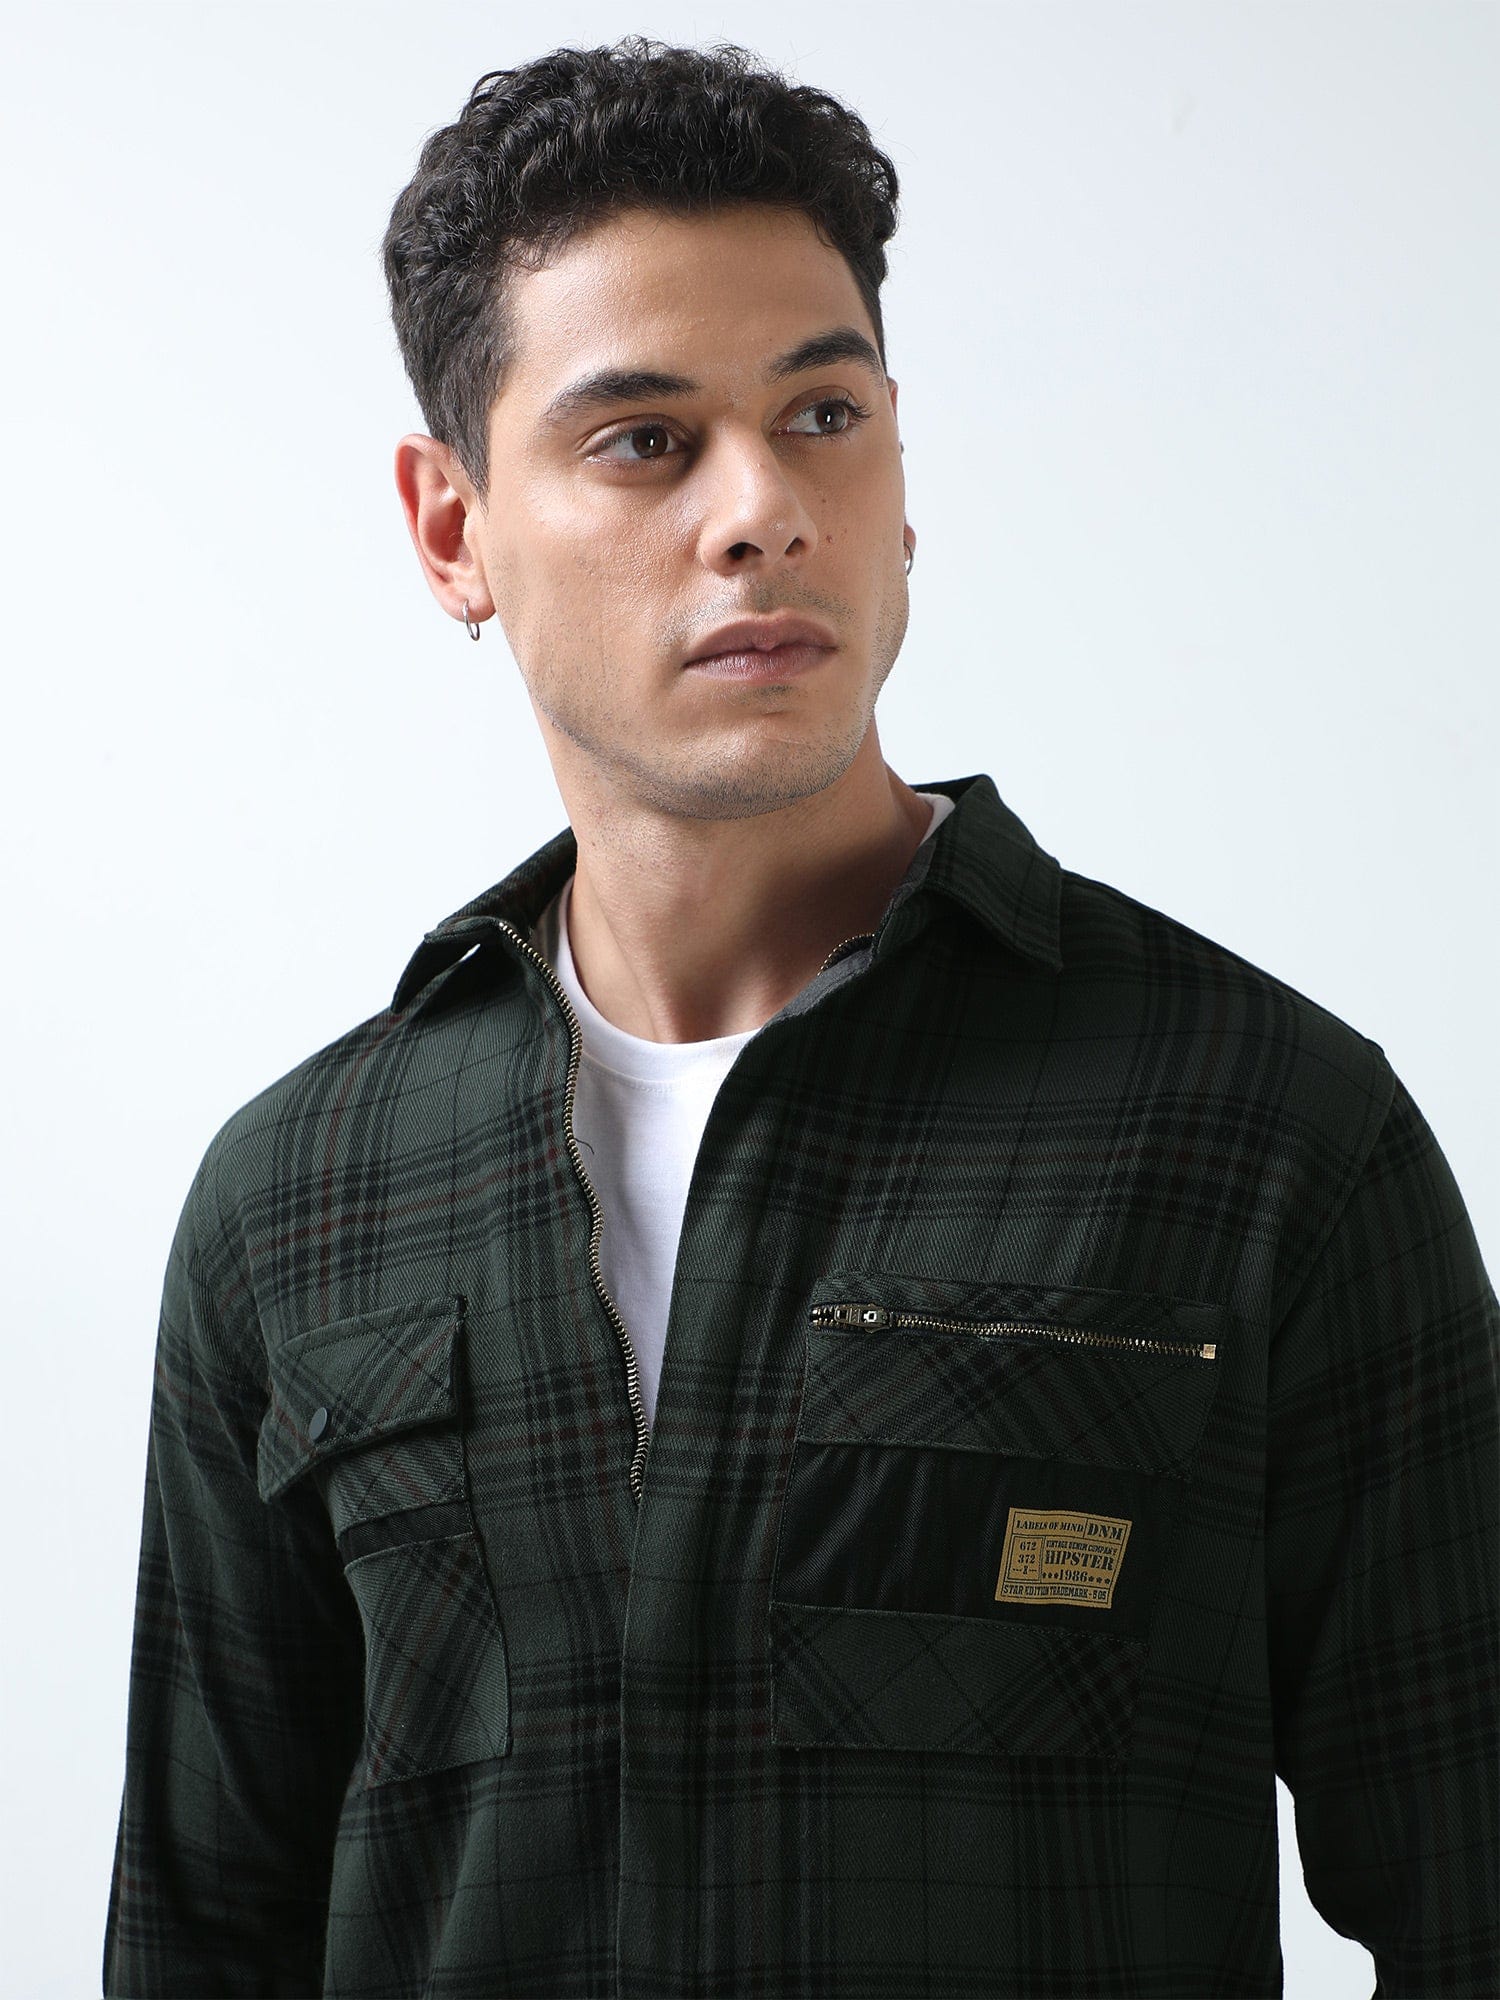 Buy Latest Green And Black Jacket Shirt For Men OnlineRs. 1499.00